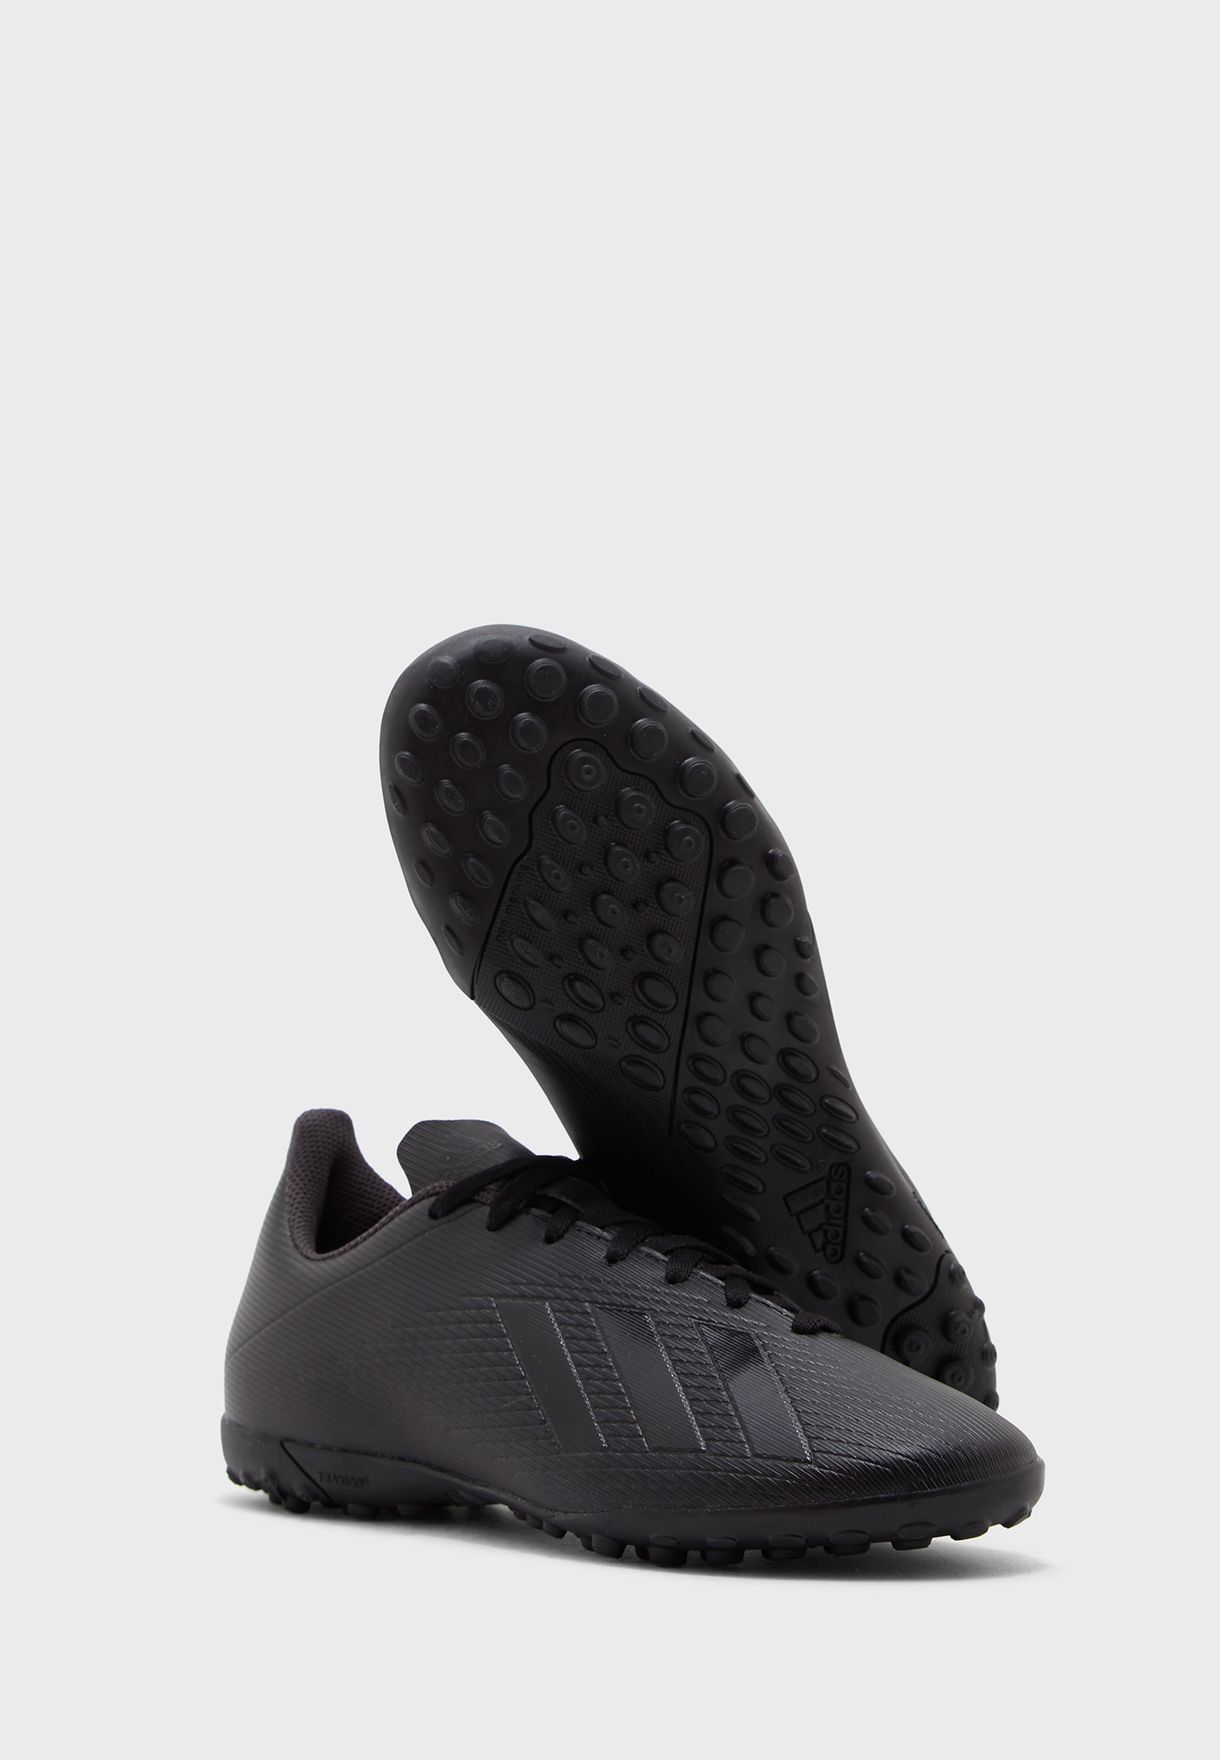 visual casualties Easy to read Buy adidas black X 19.4 TF for Men in MENA, Worldwide